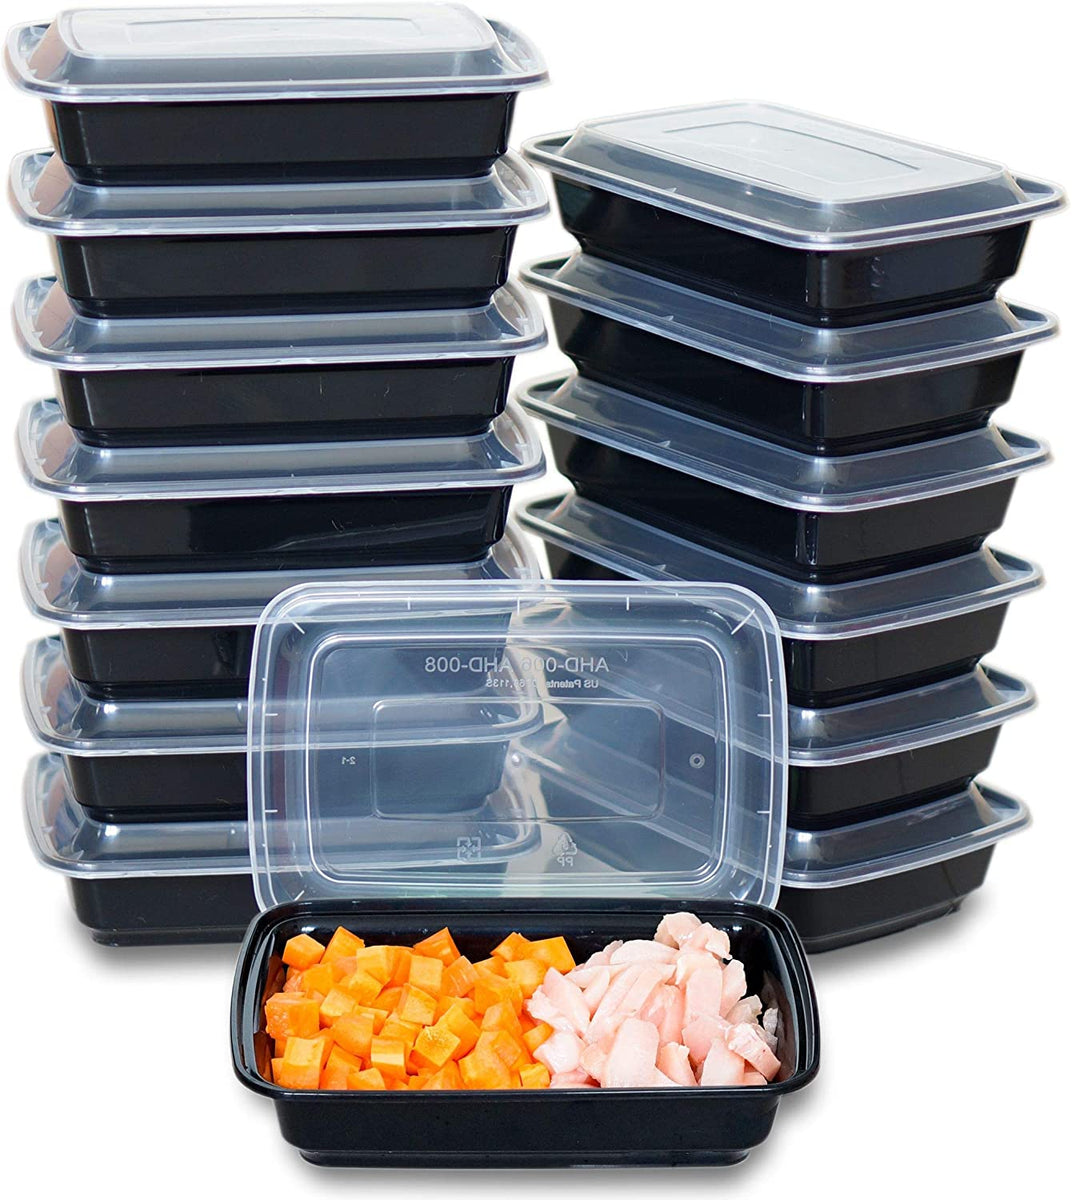 Meal Prep Container,30 Pack Food Prep Containers,28 oz Meal Prep Bowls with Lids,Reusable Food Containers with Lids,Round Plastic Lunch Containers